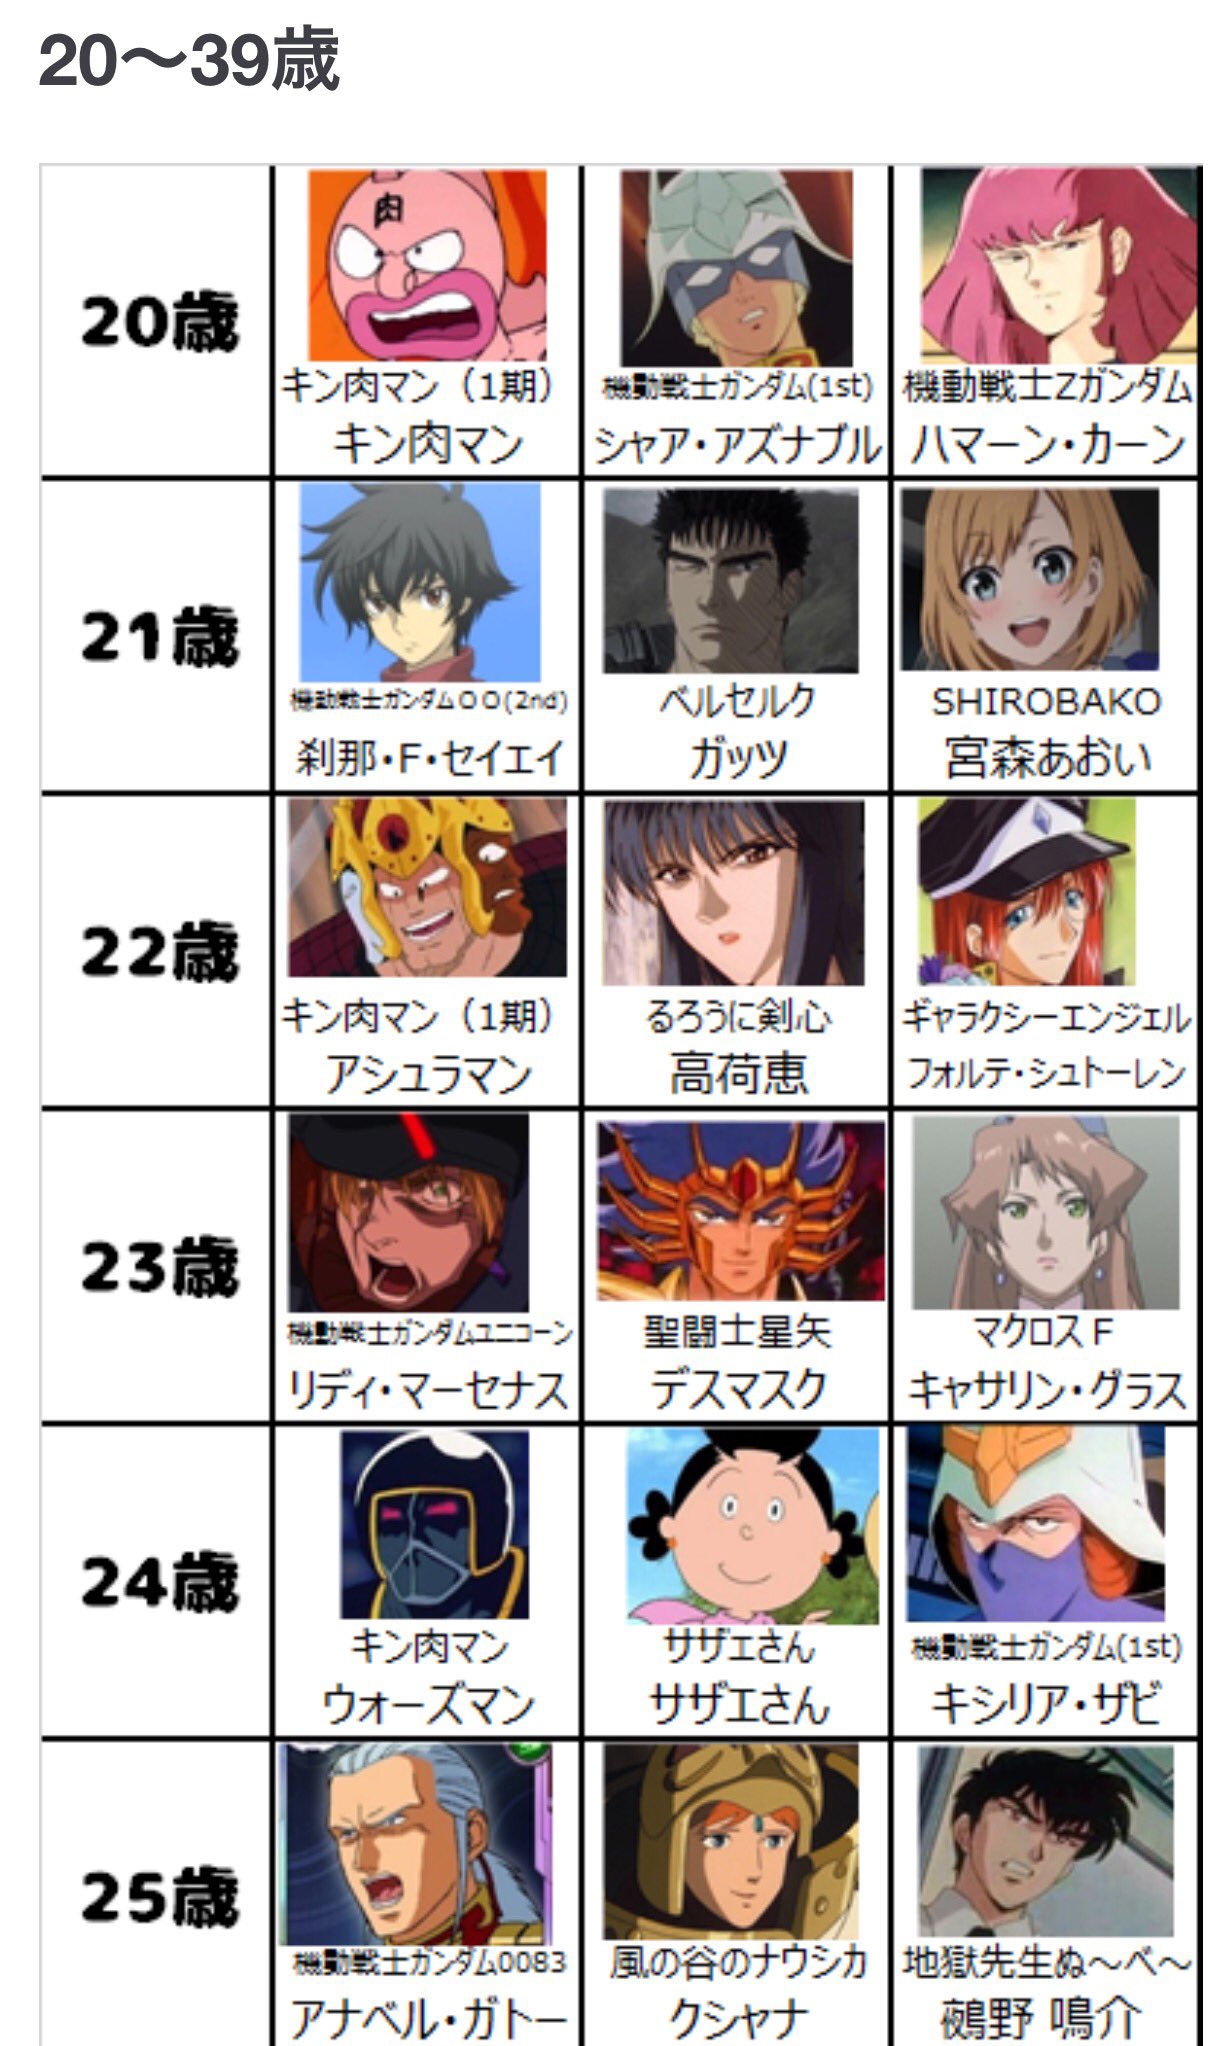 Most Popular Characters In Anime History According To MyAnimeList